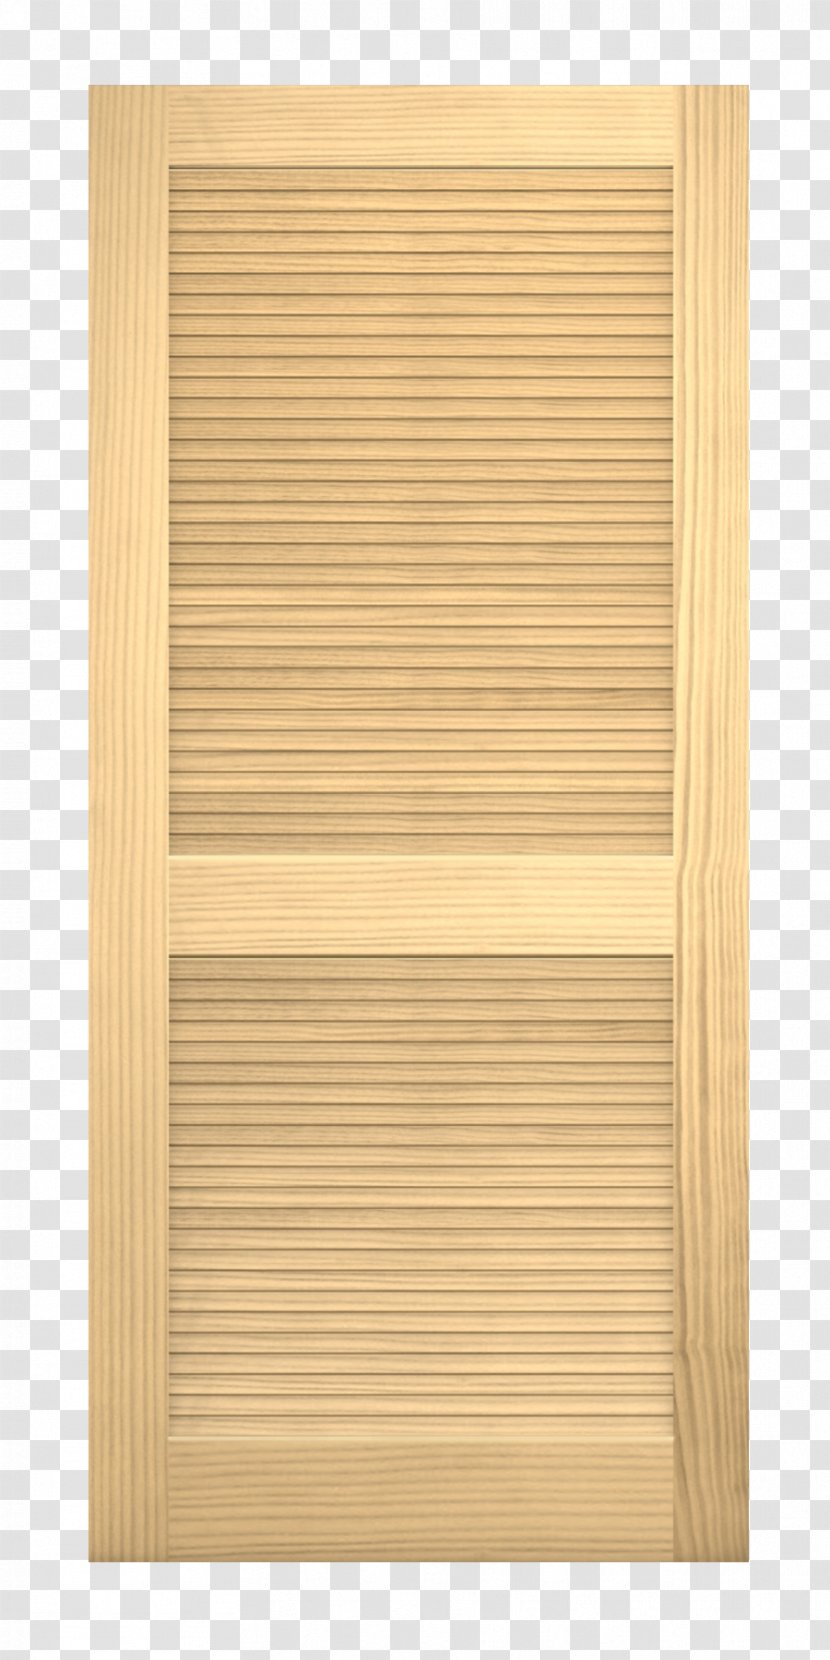 Plywood Wood Stain Varnish Hardwood Angle - Solid Doors And Windows Transparent PNG